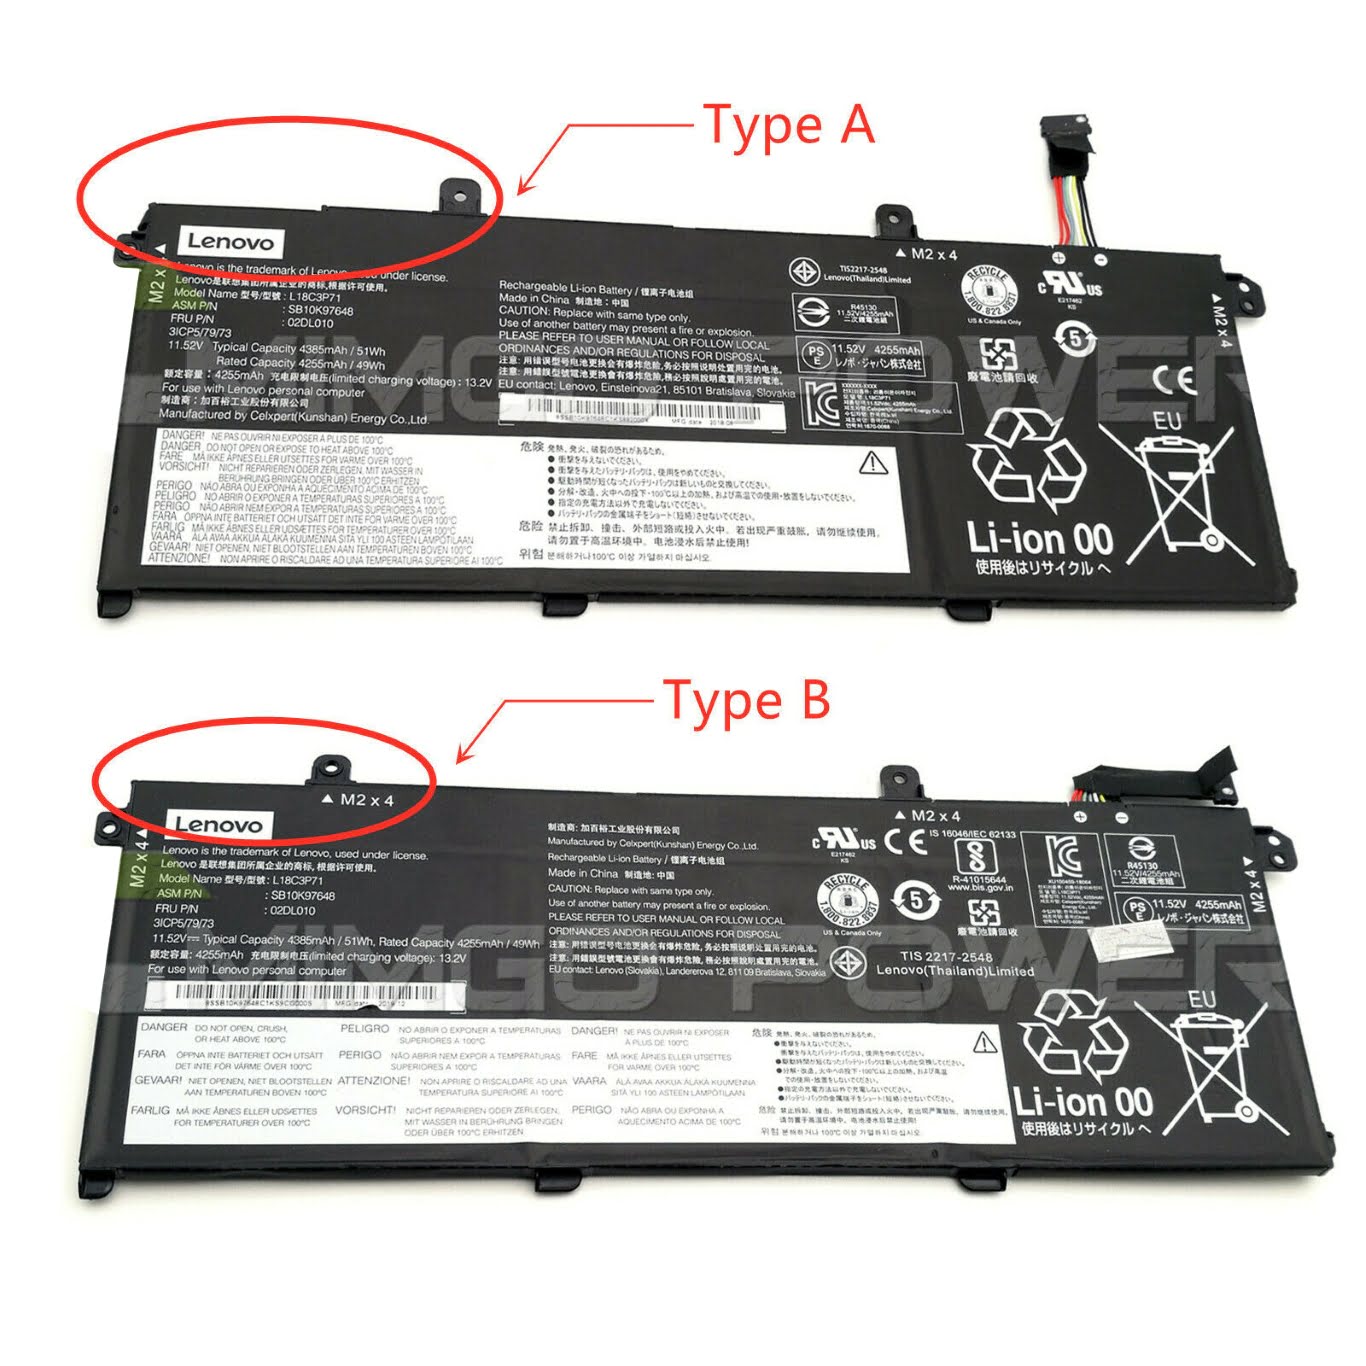 02DL007, 02DL008 replacement Laptop Battery for Lenovo ThinkPad, ThinkPad P14s 1st Gen Ser, 11.52v, 4385mah / 51wh